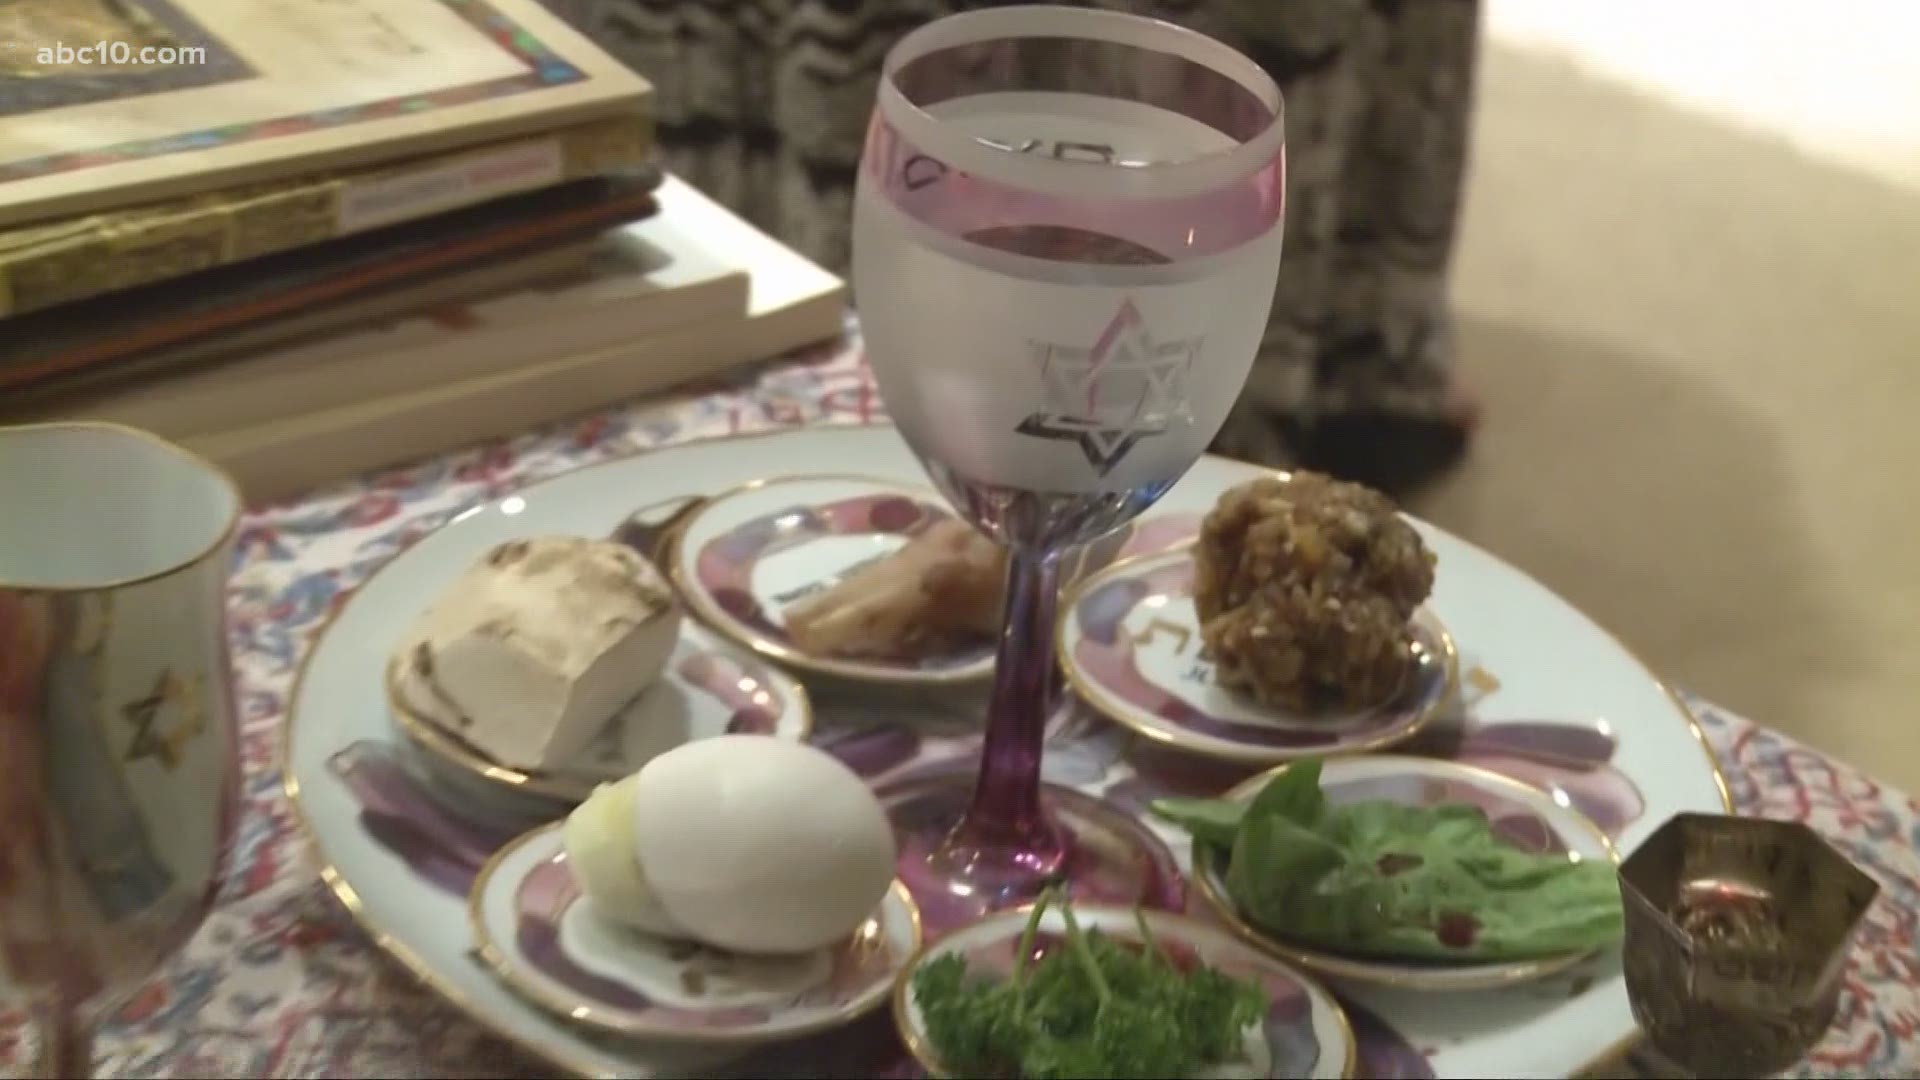 Rabbi in Sacramento offering Seder-to-go kits for Passover